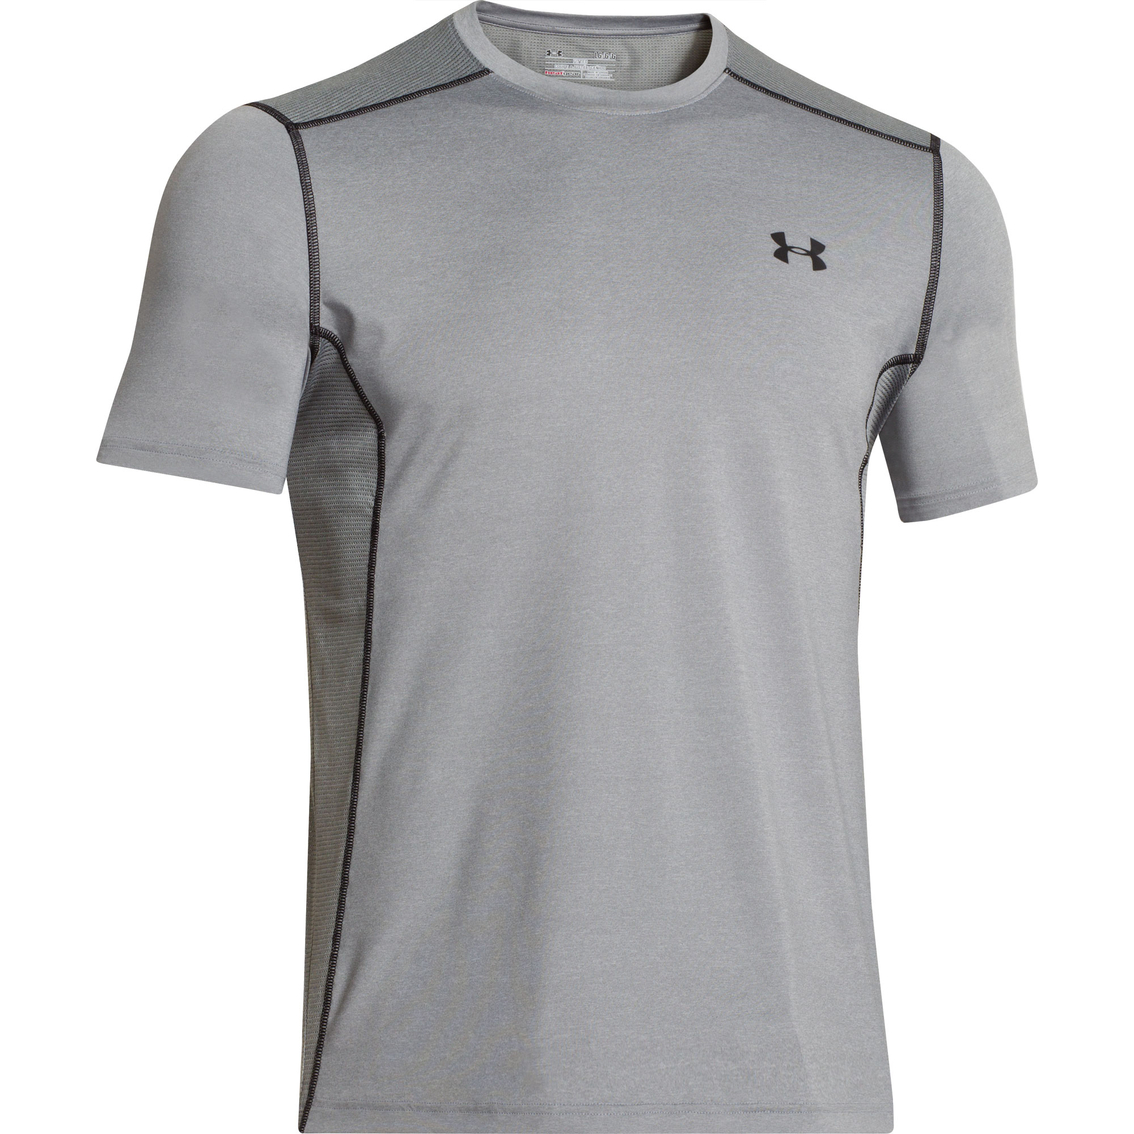 Under Armour Raid Tee | Shirts | Clothing & Accessories | Shop The Exchange